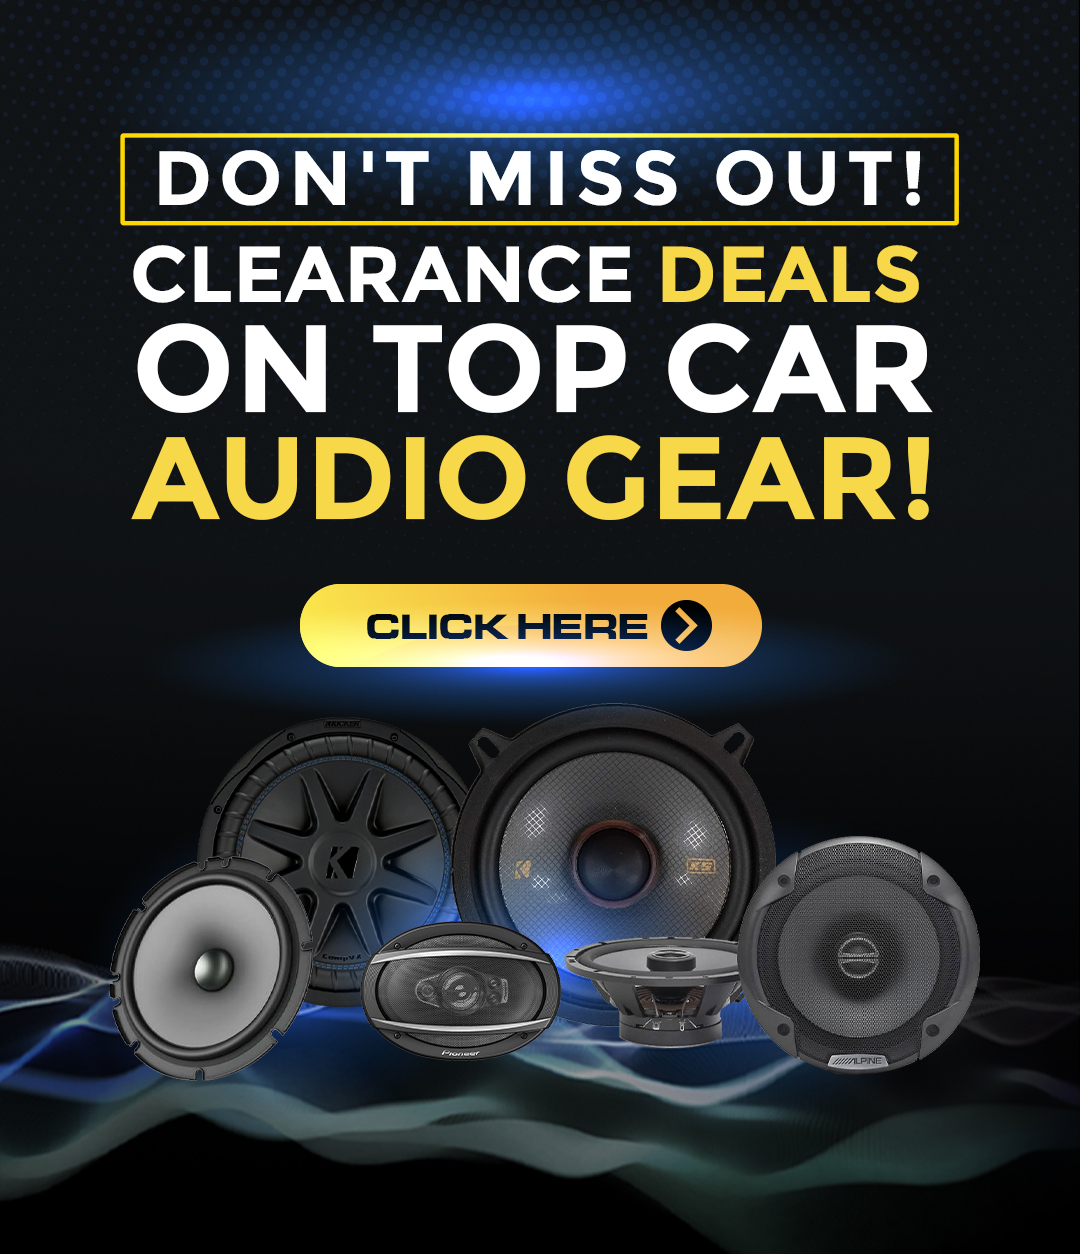 Don't Miss Out! Clearance Deals on Top Car Audio Gear!